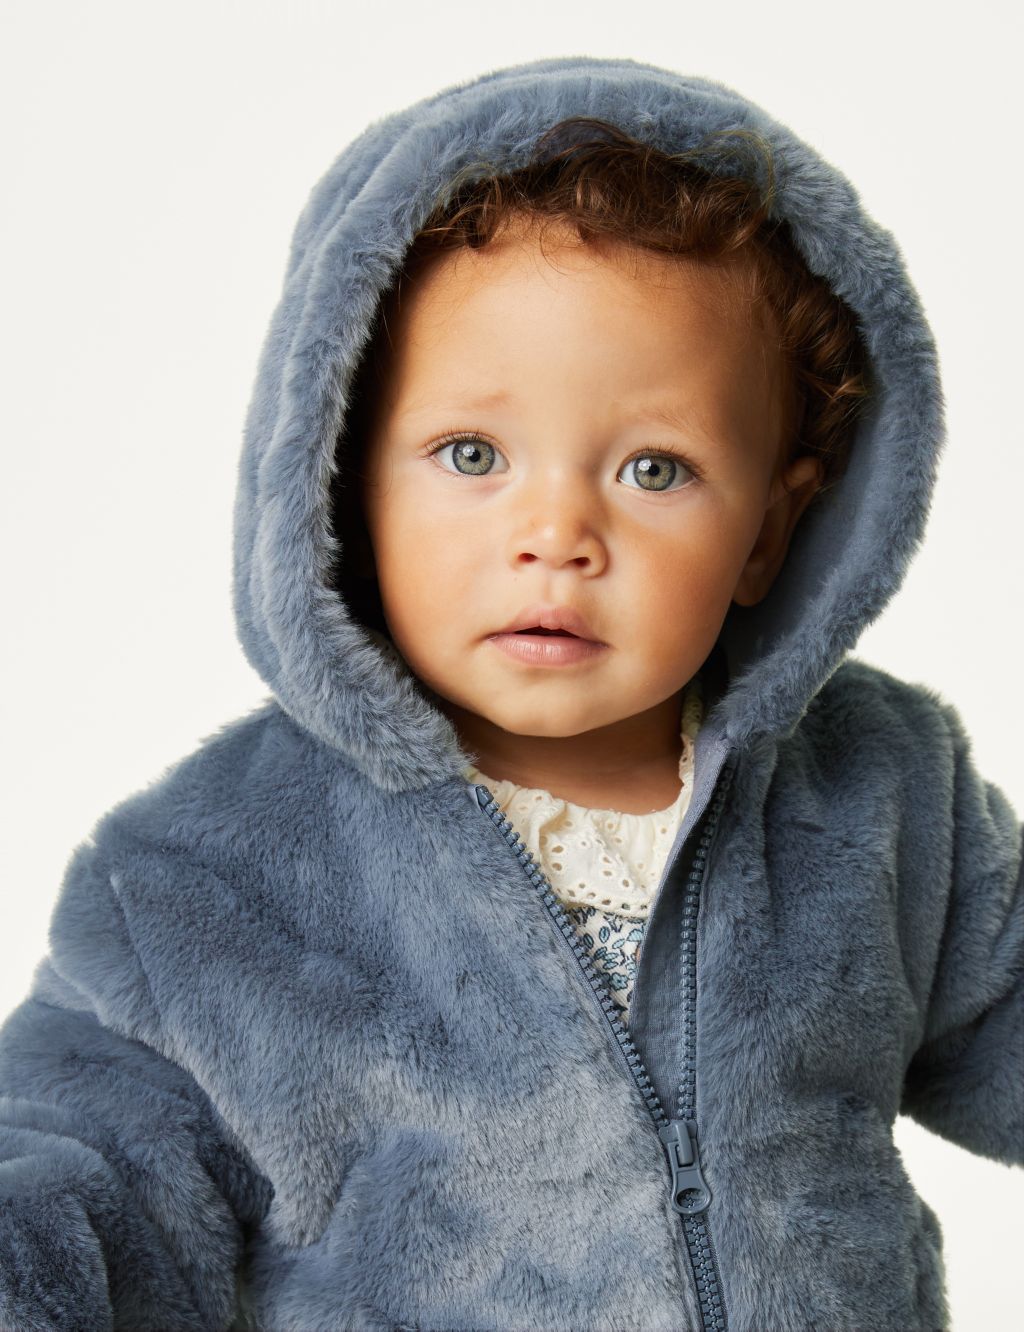 Page 9 - Baby Clothes | Baby & Toddler Clothes | M&S